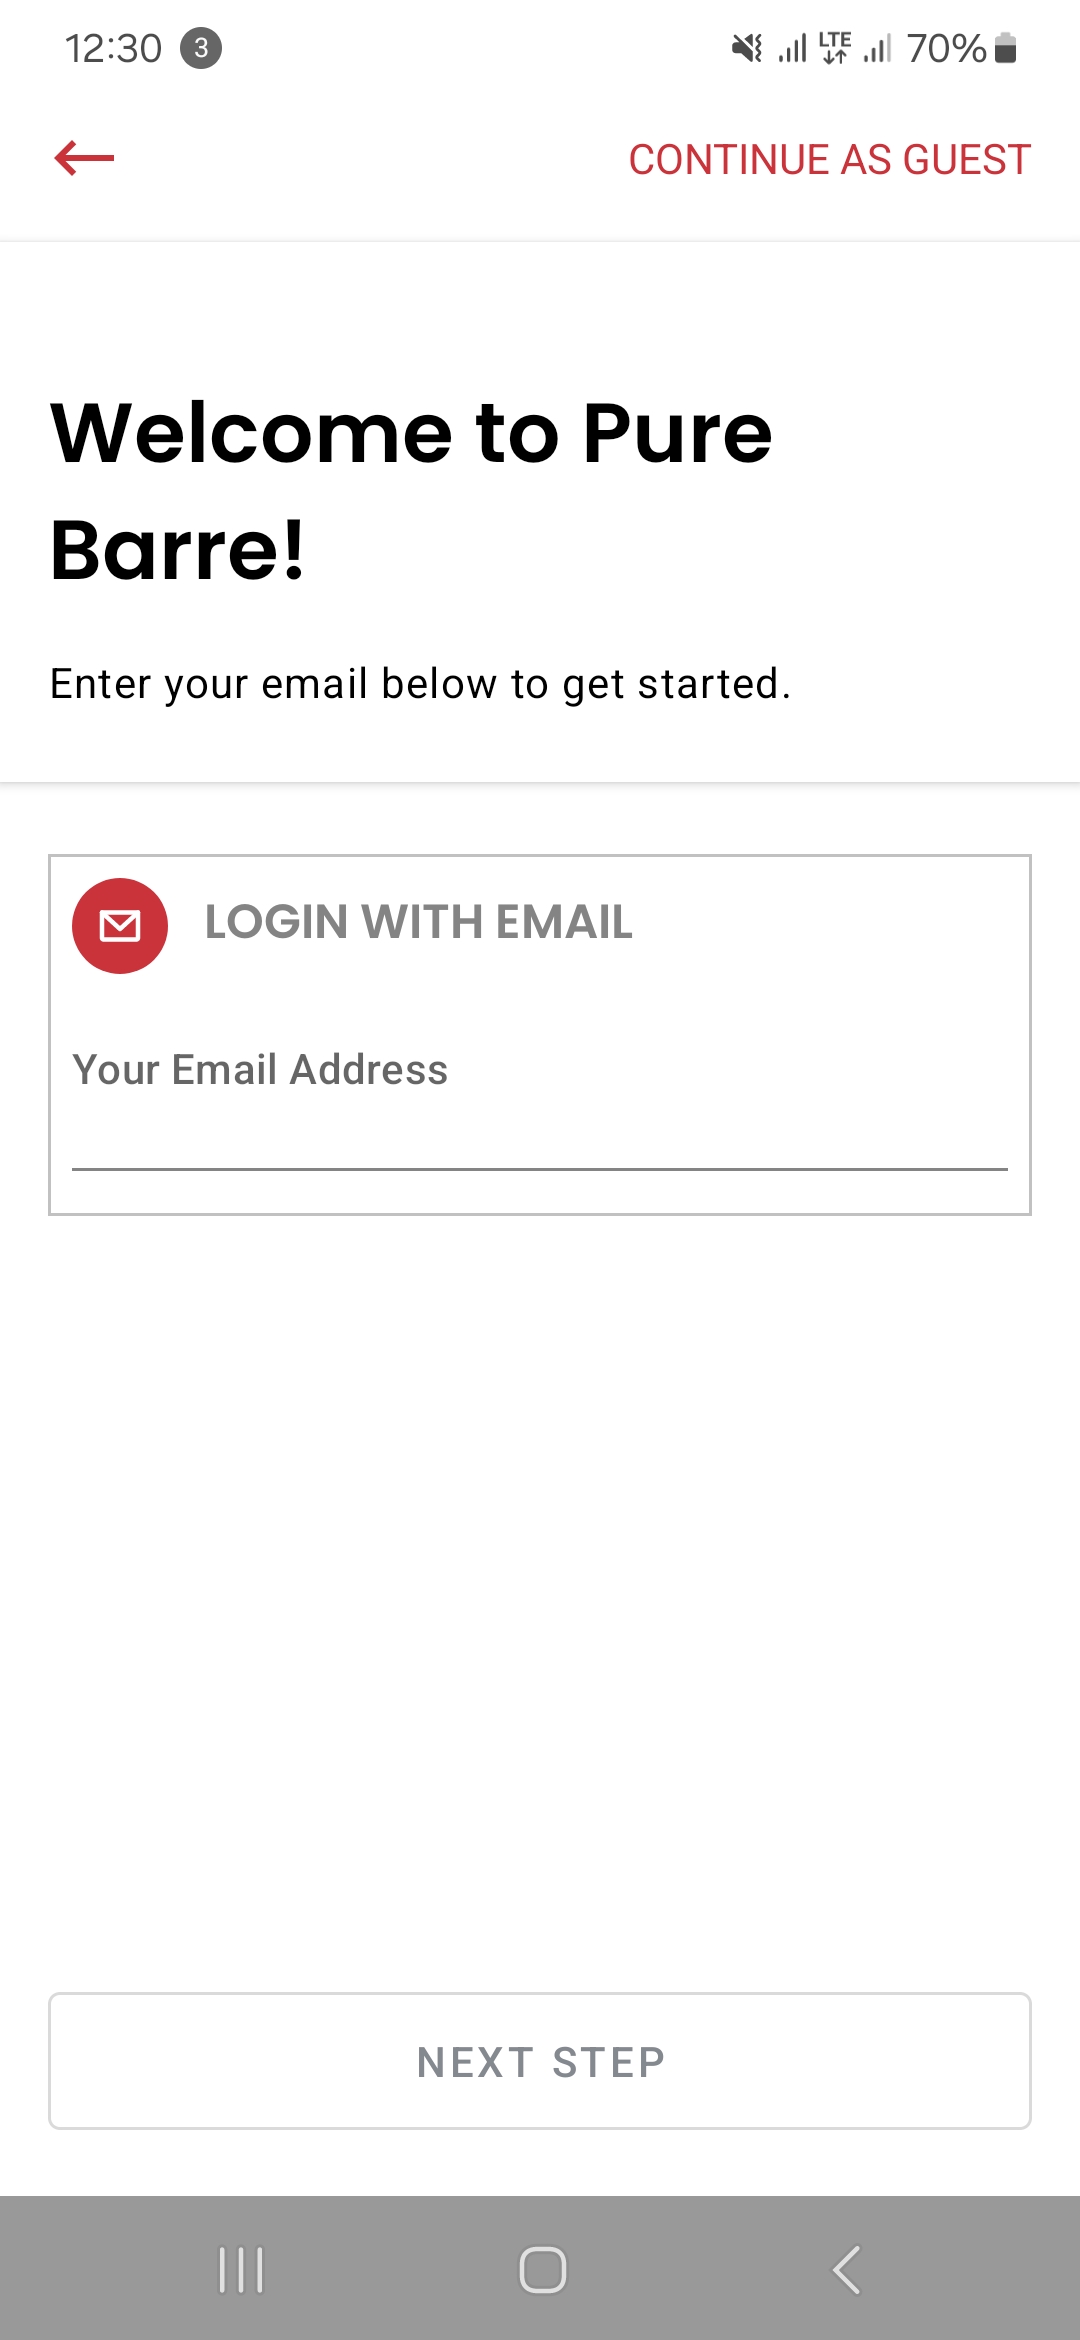 Possible to pass registration without email verification